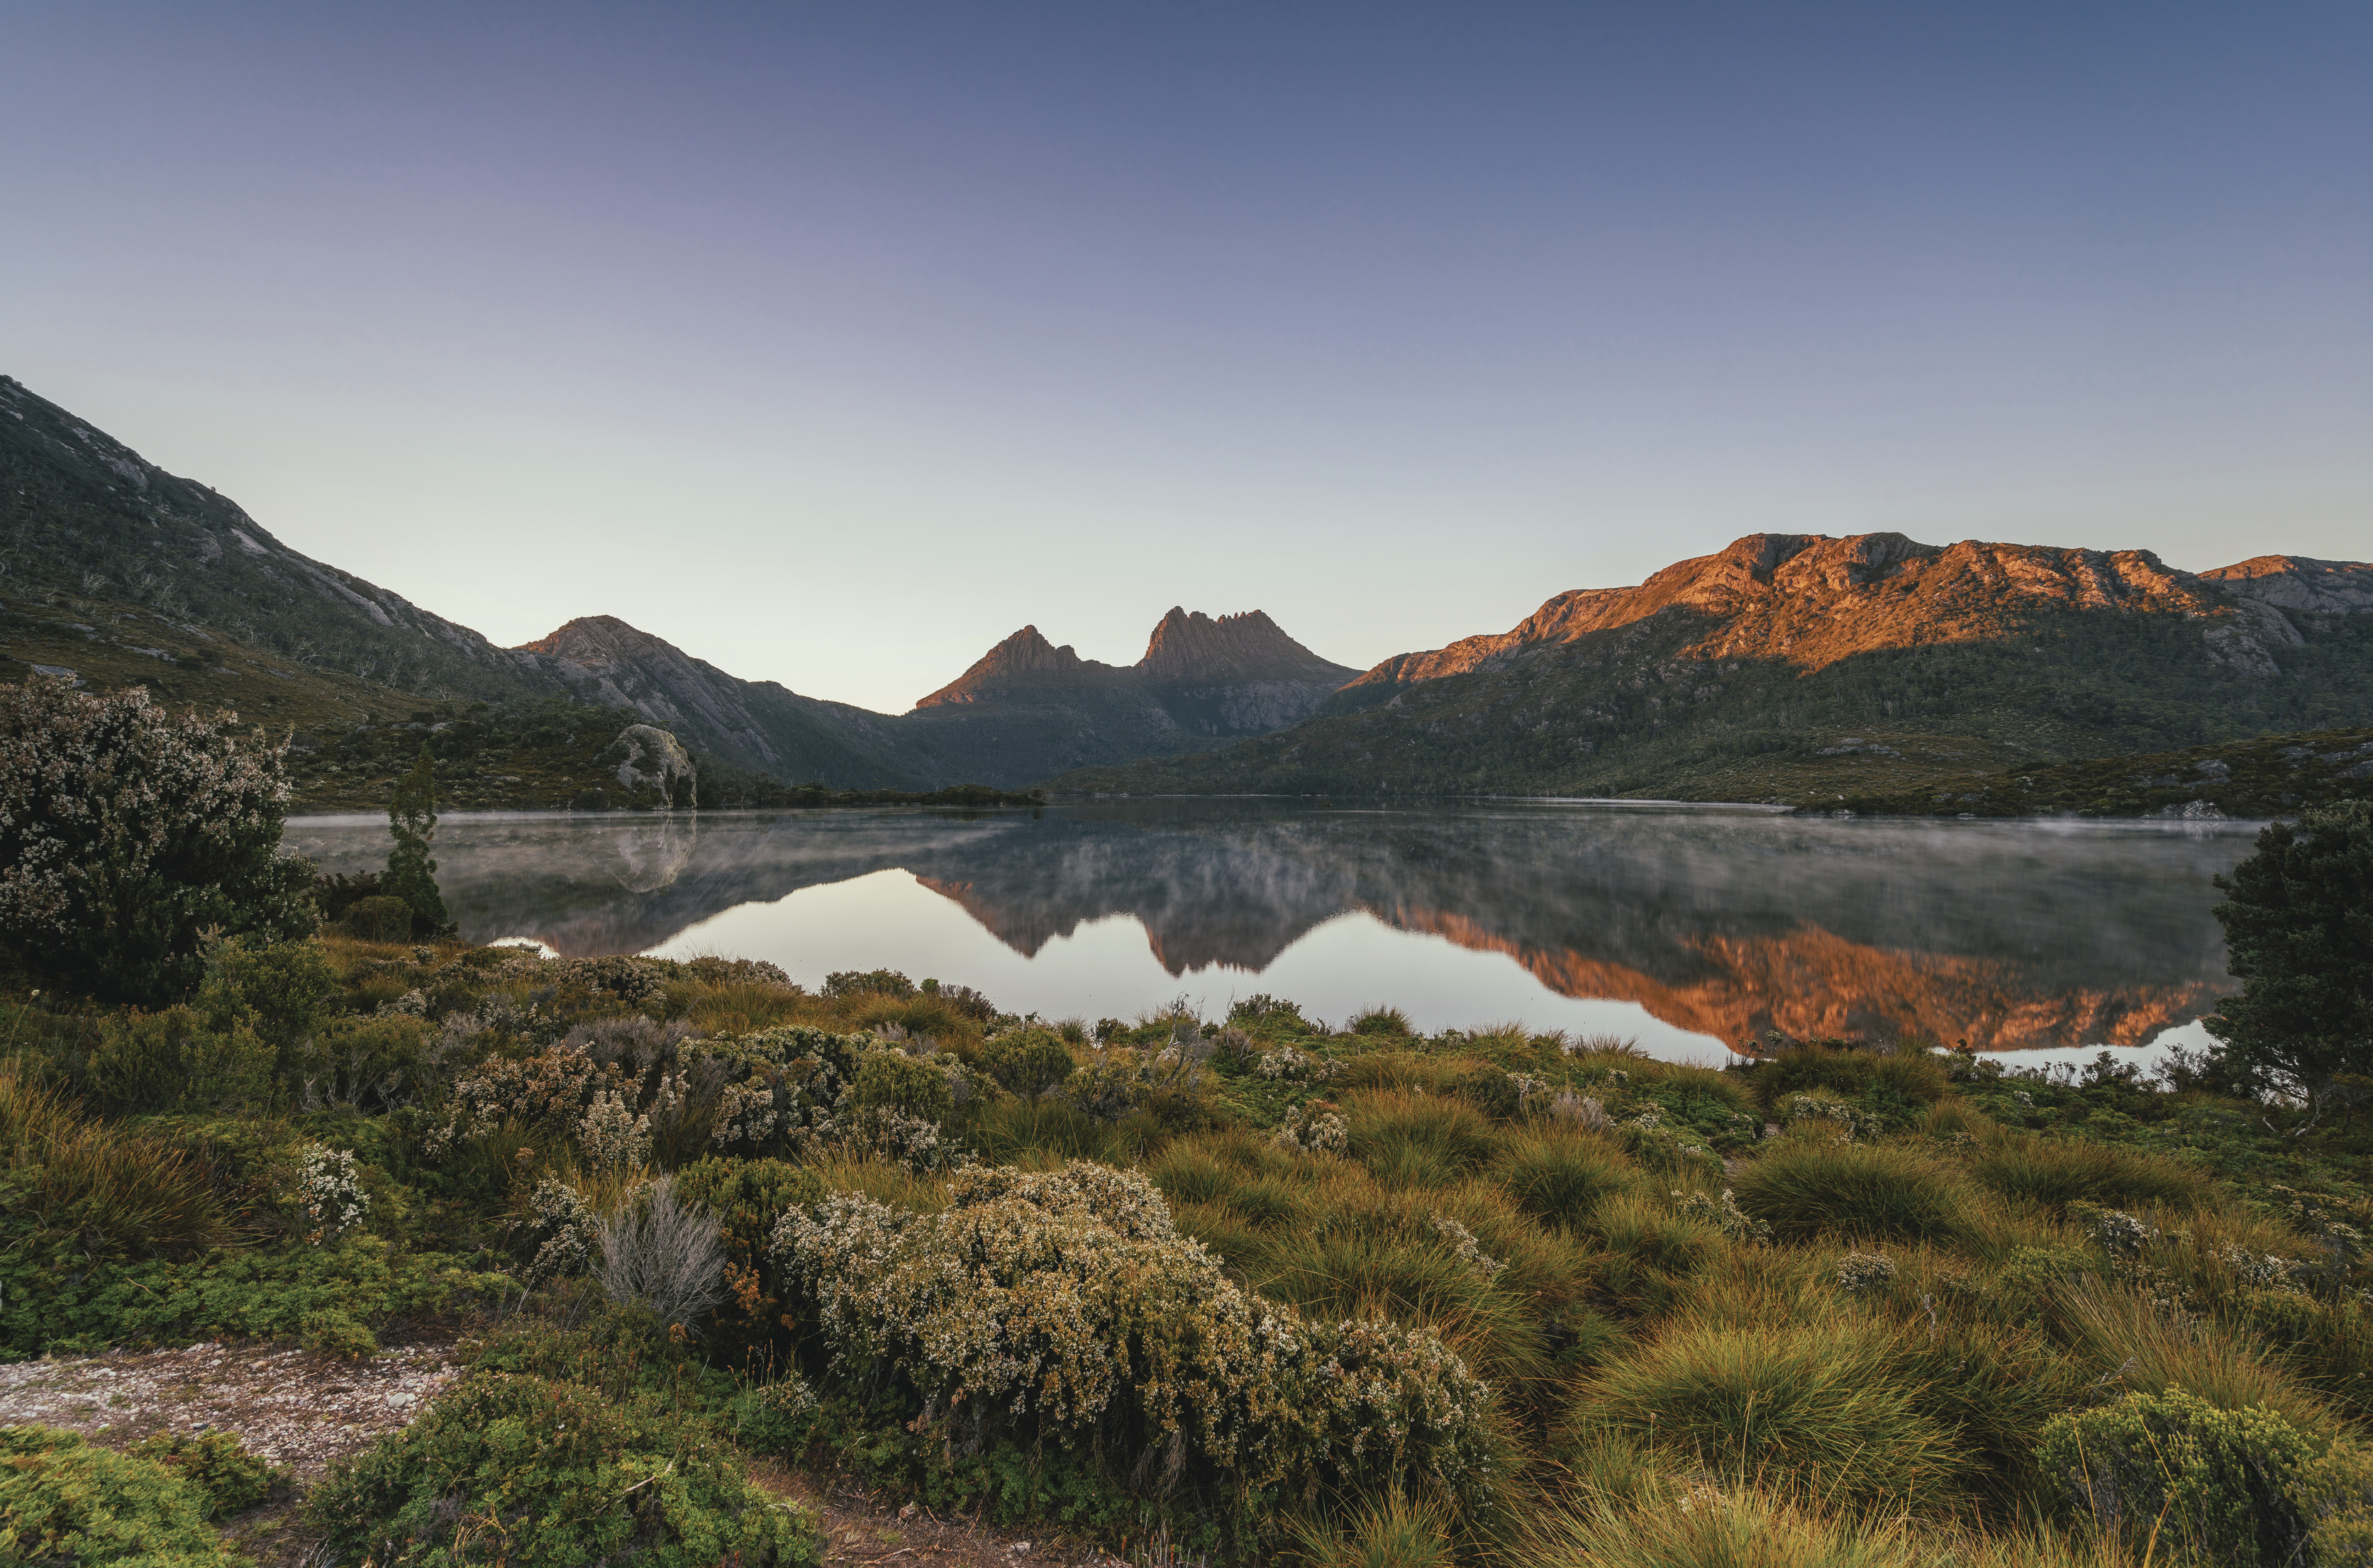 View of Cradle Mountain across the glassy Dove Lake